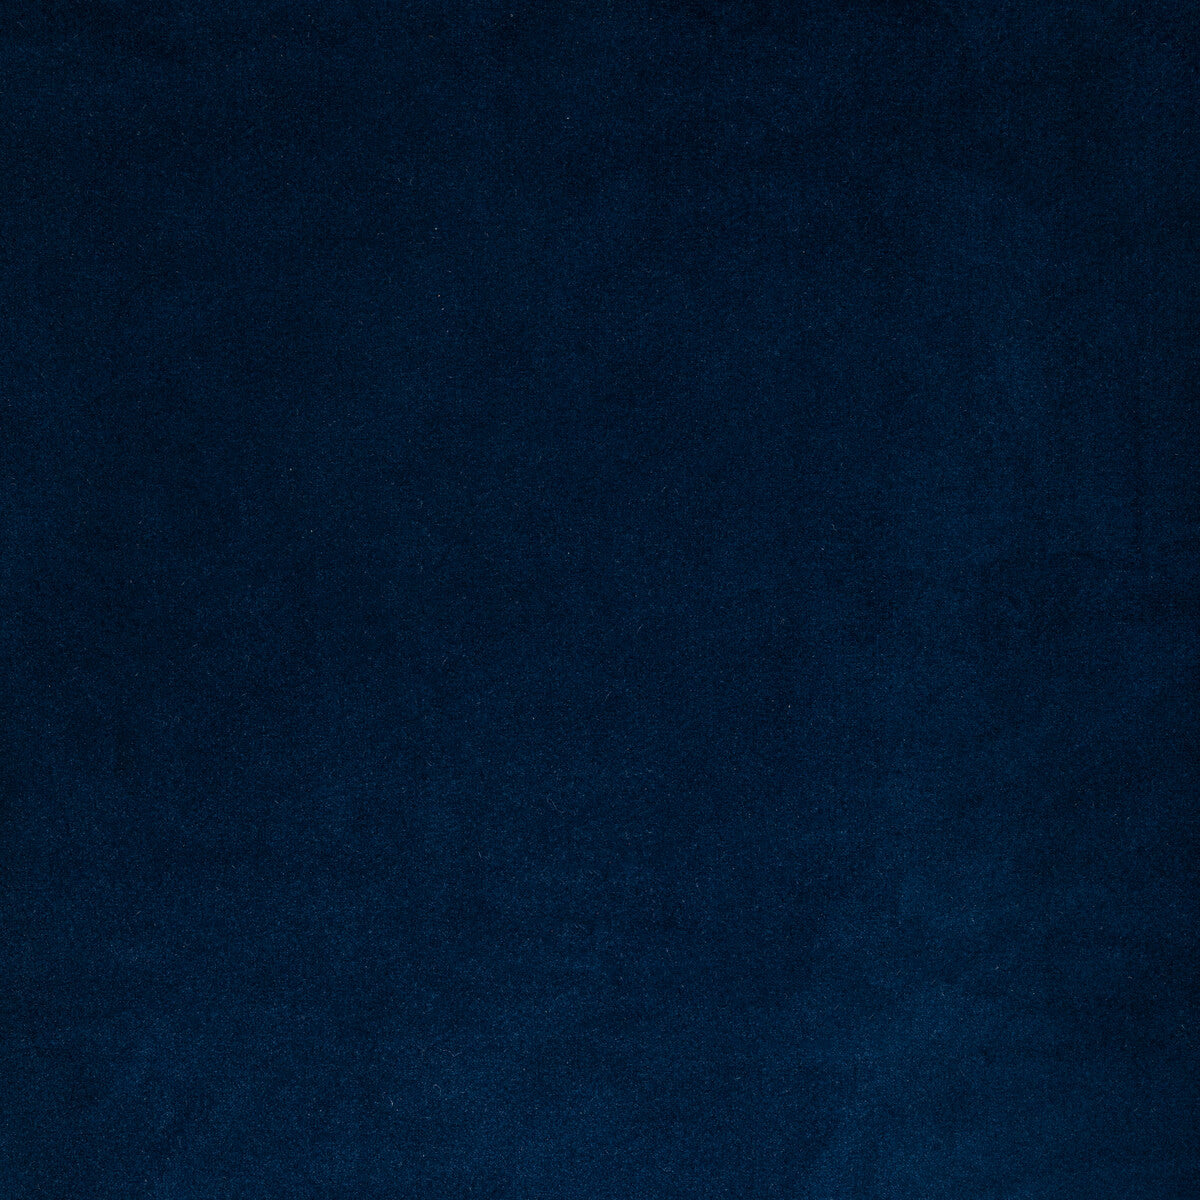 Rocco Velvet fabric in cobalt color - pattern KW-10065.3685MG59.0 - by Kravet Contract